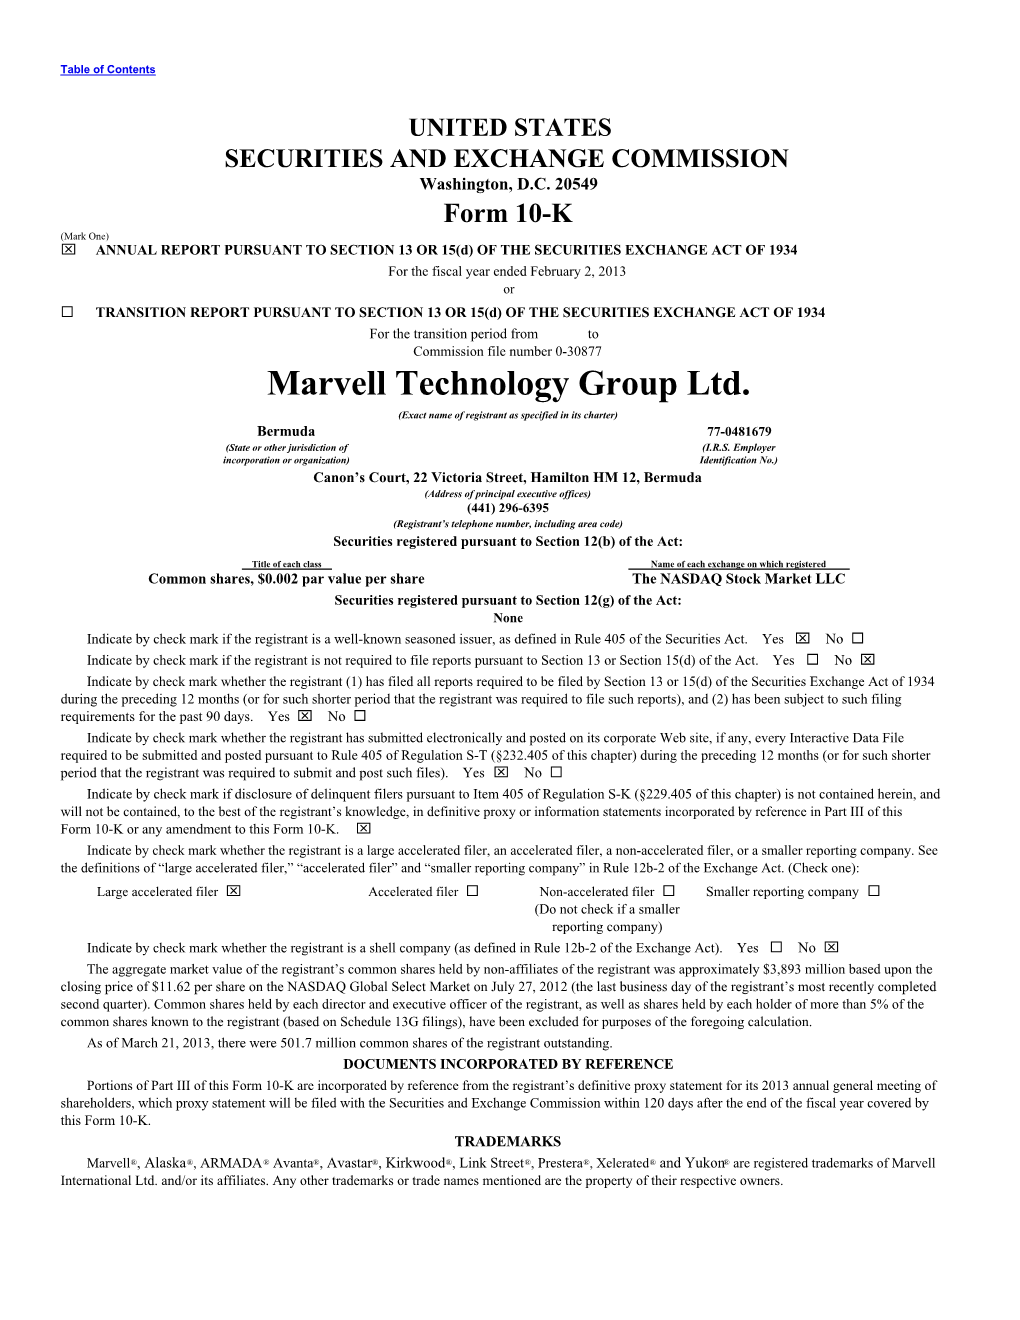 Marvell Technology Group Ltd. (Exact Name of Registrant As Specified in Its Charter)